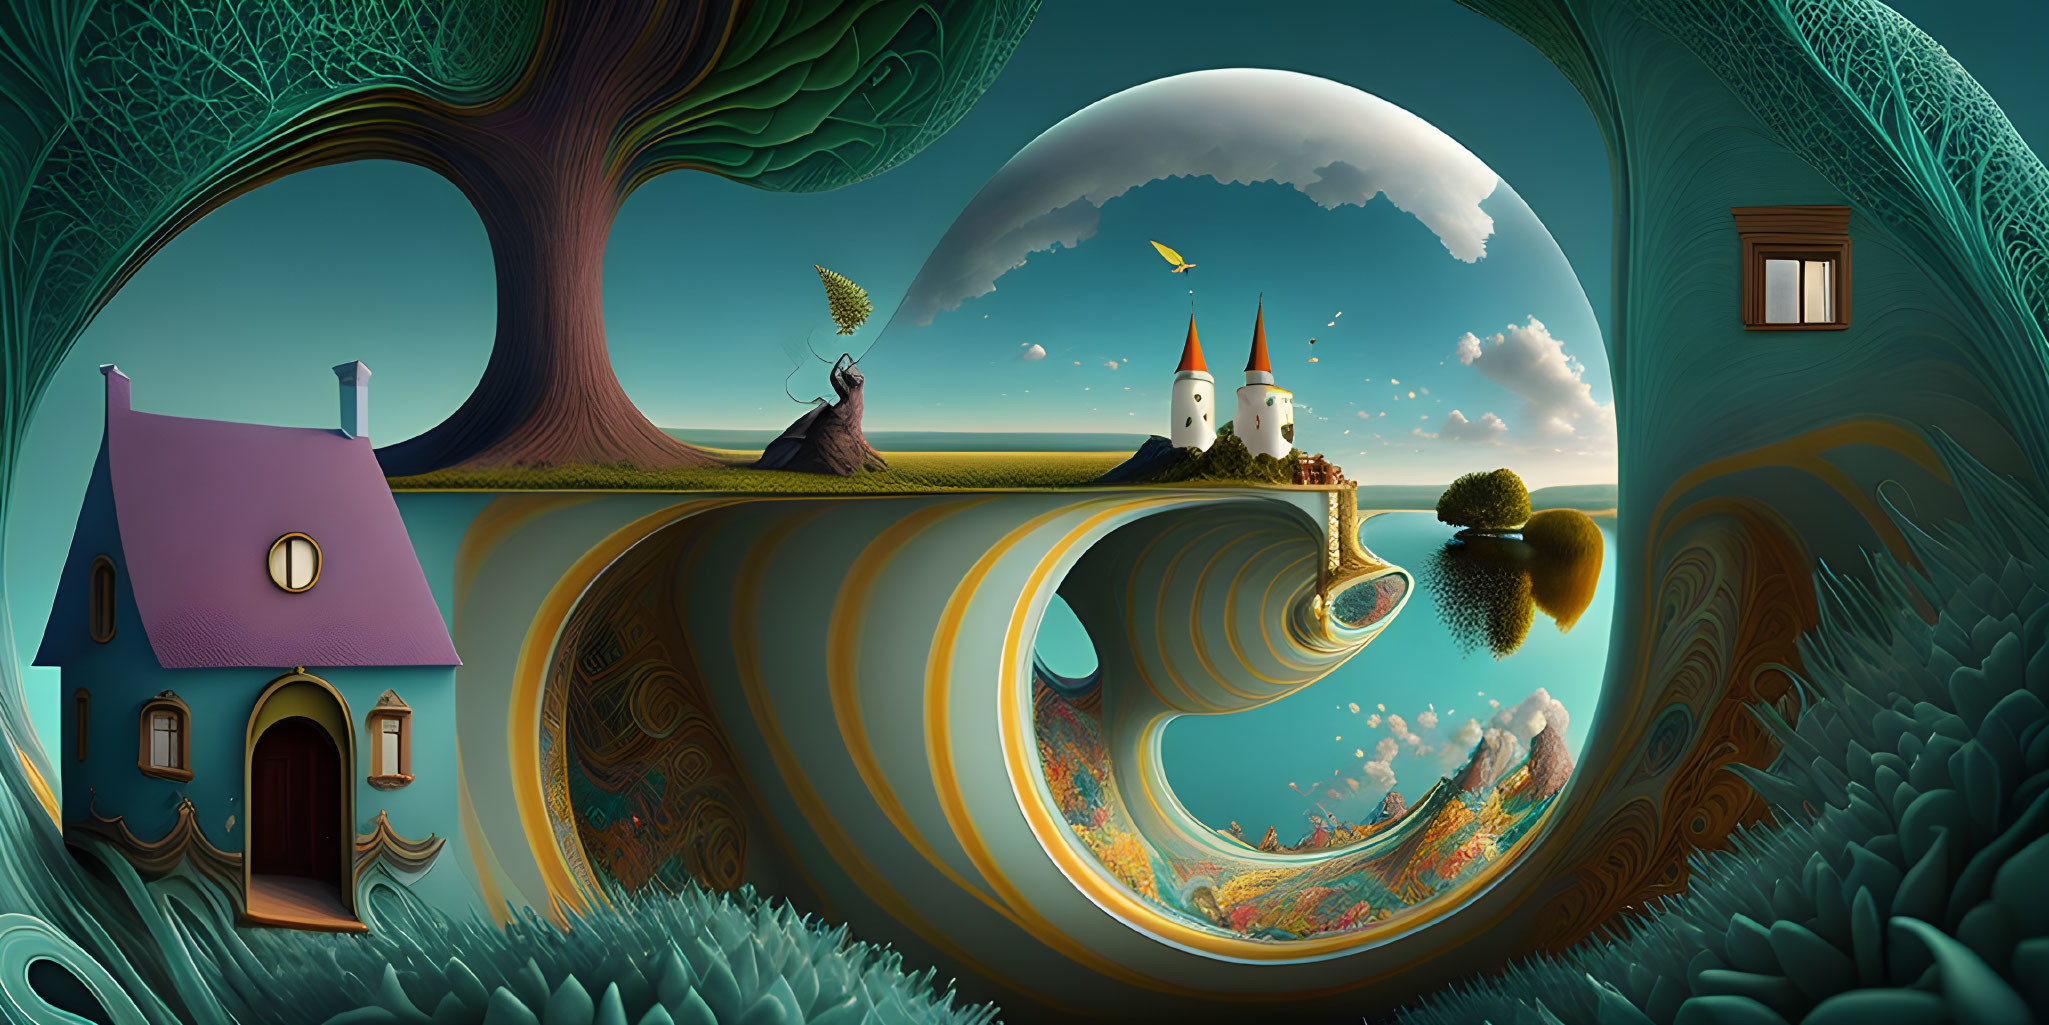 Vibrant surreal landscape with houses, trees, and castle under circular sky